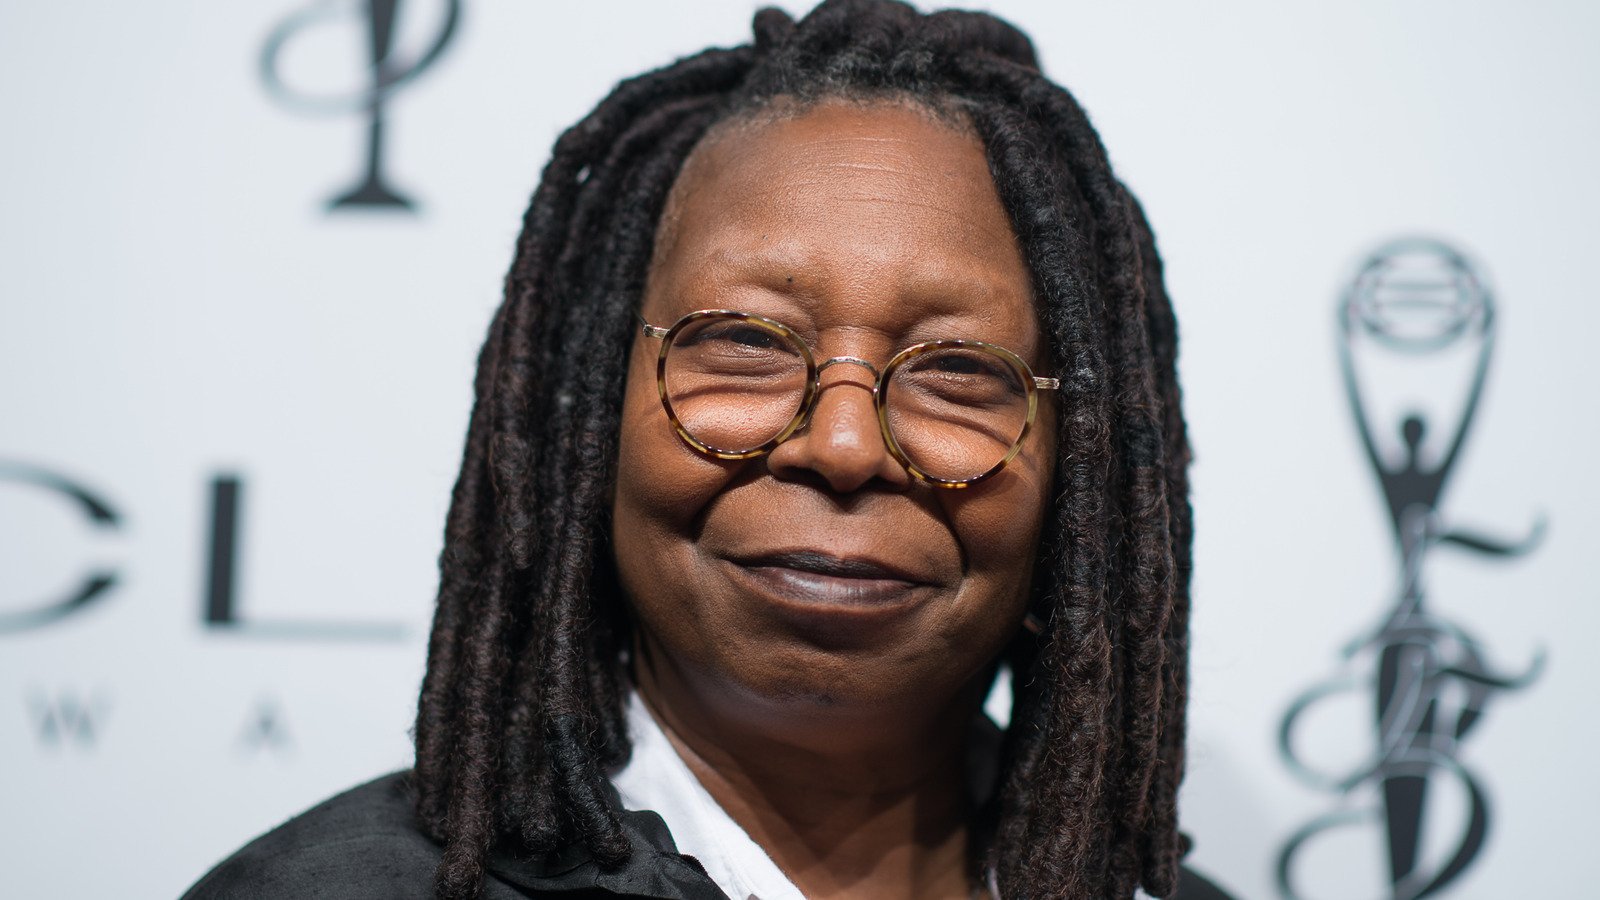 Whoopi Goldberg in the Marches: the actress will shoot Leopardi & Co. in Recanati